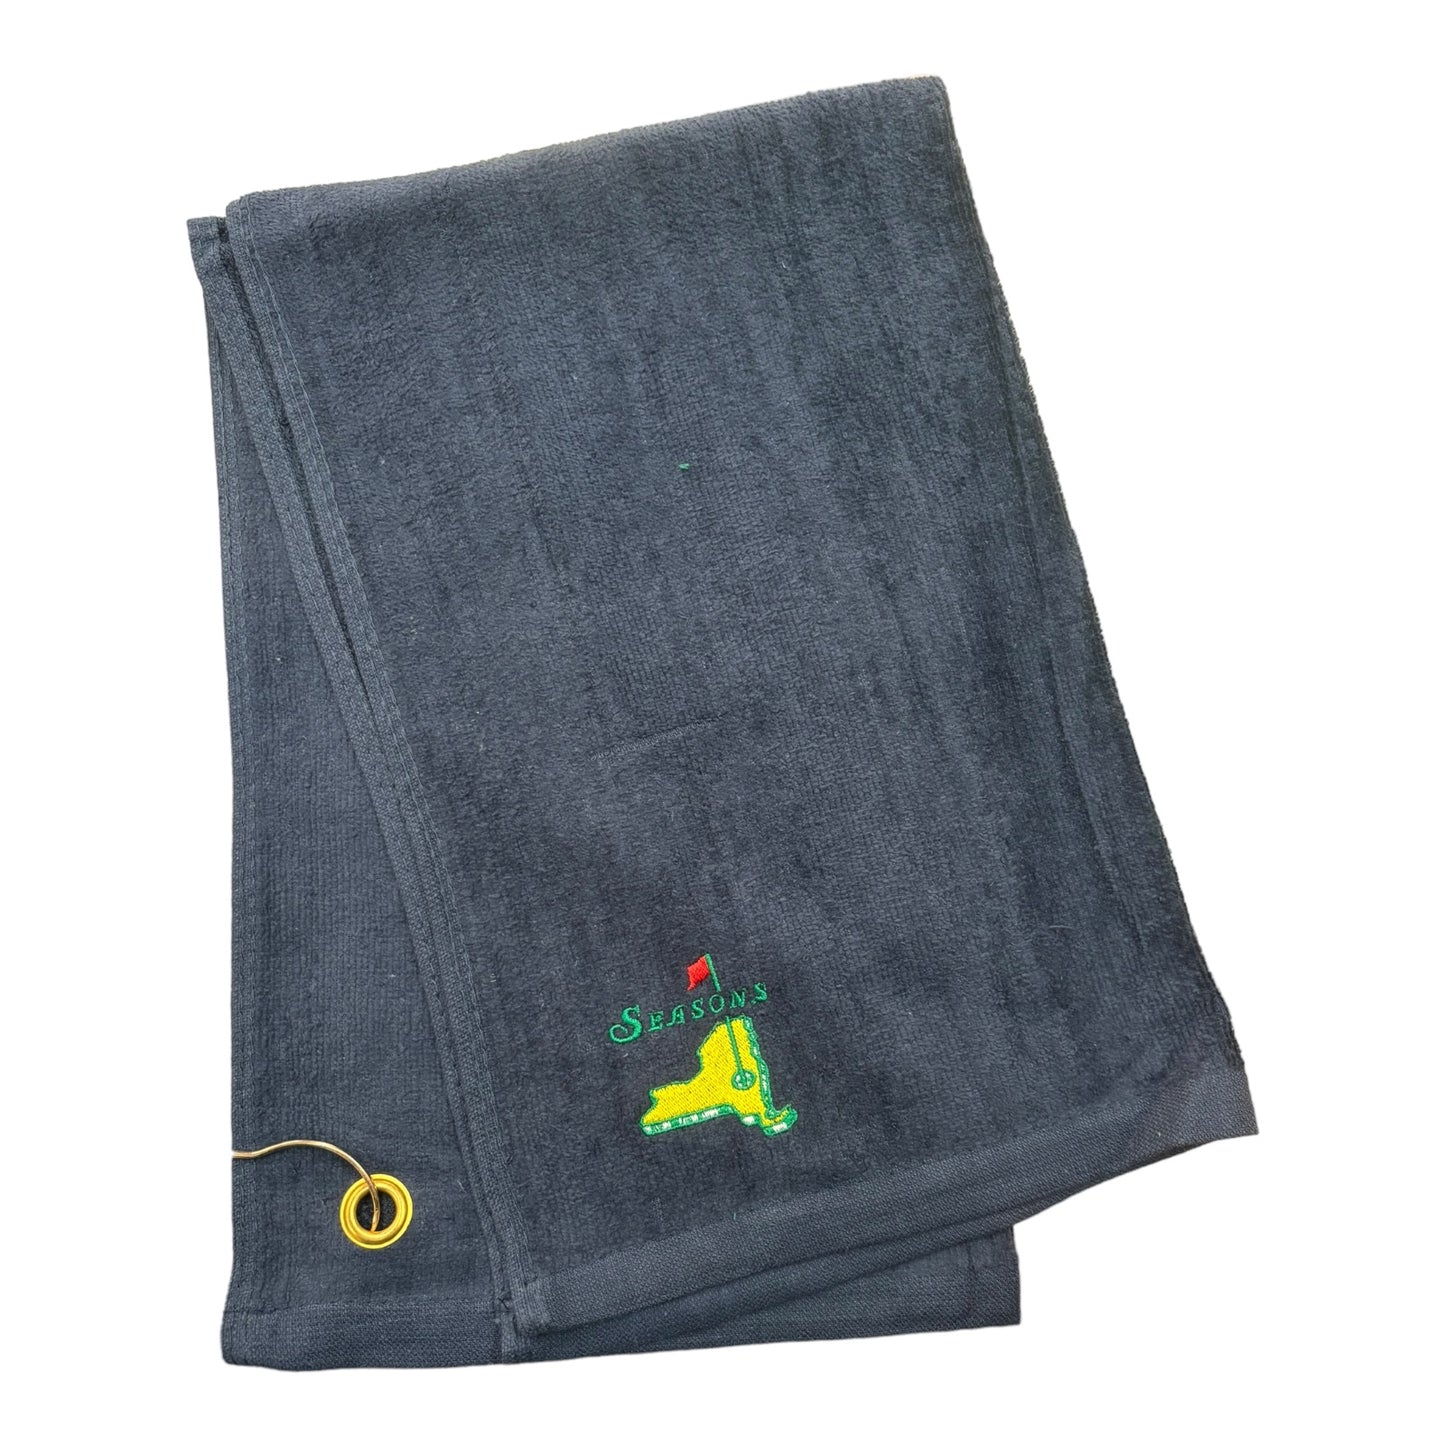 Seasons Embroidered Golf Towel- Navy